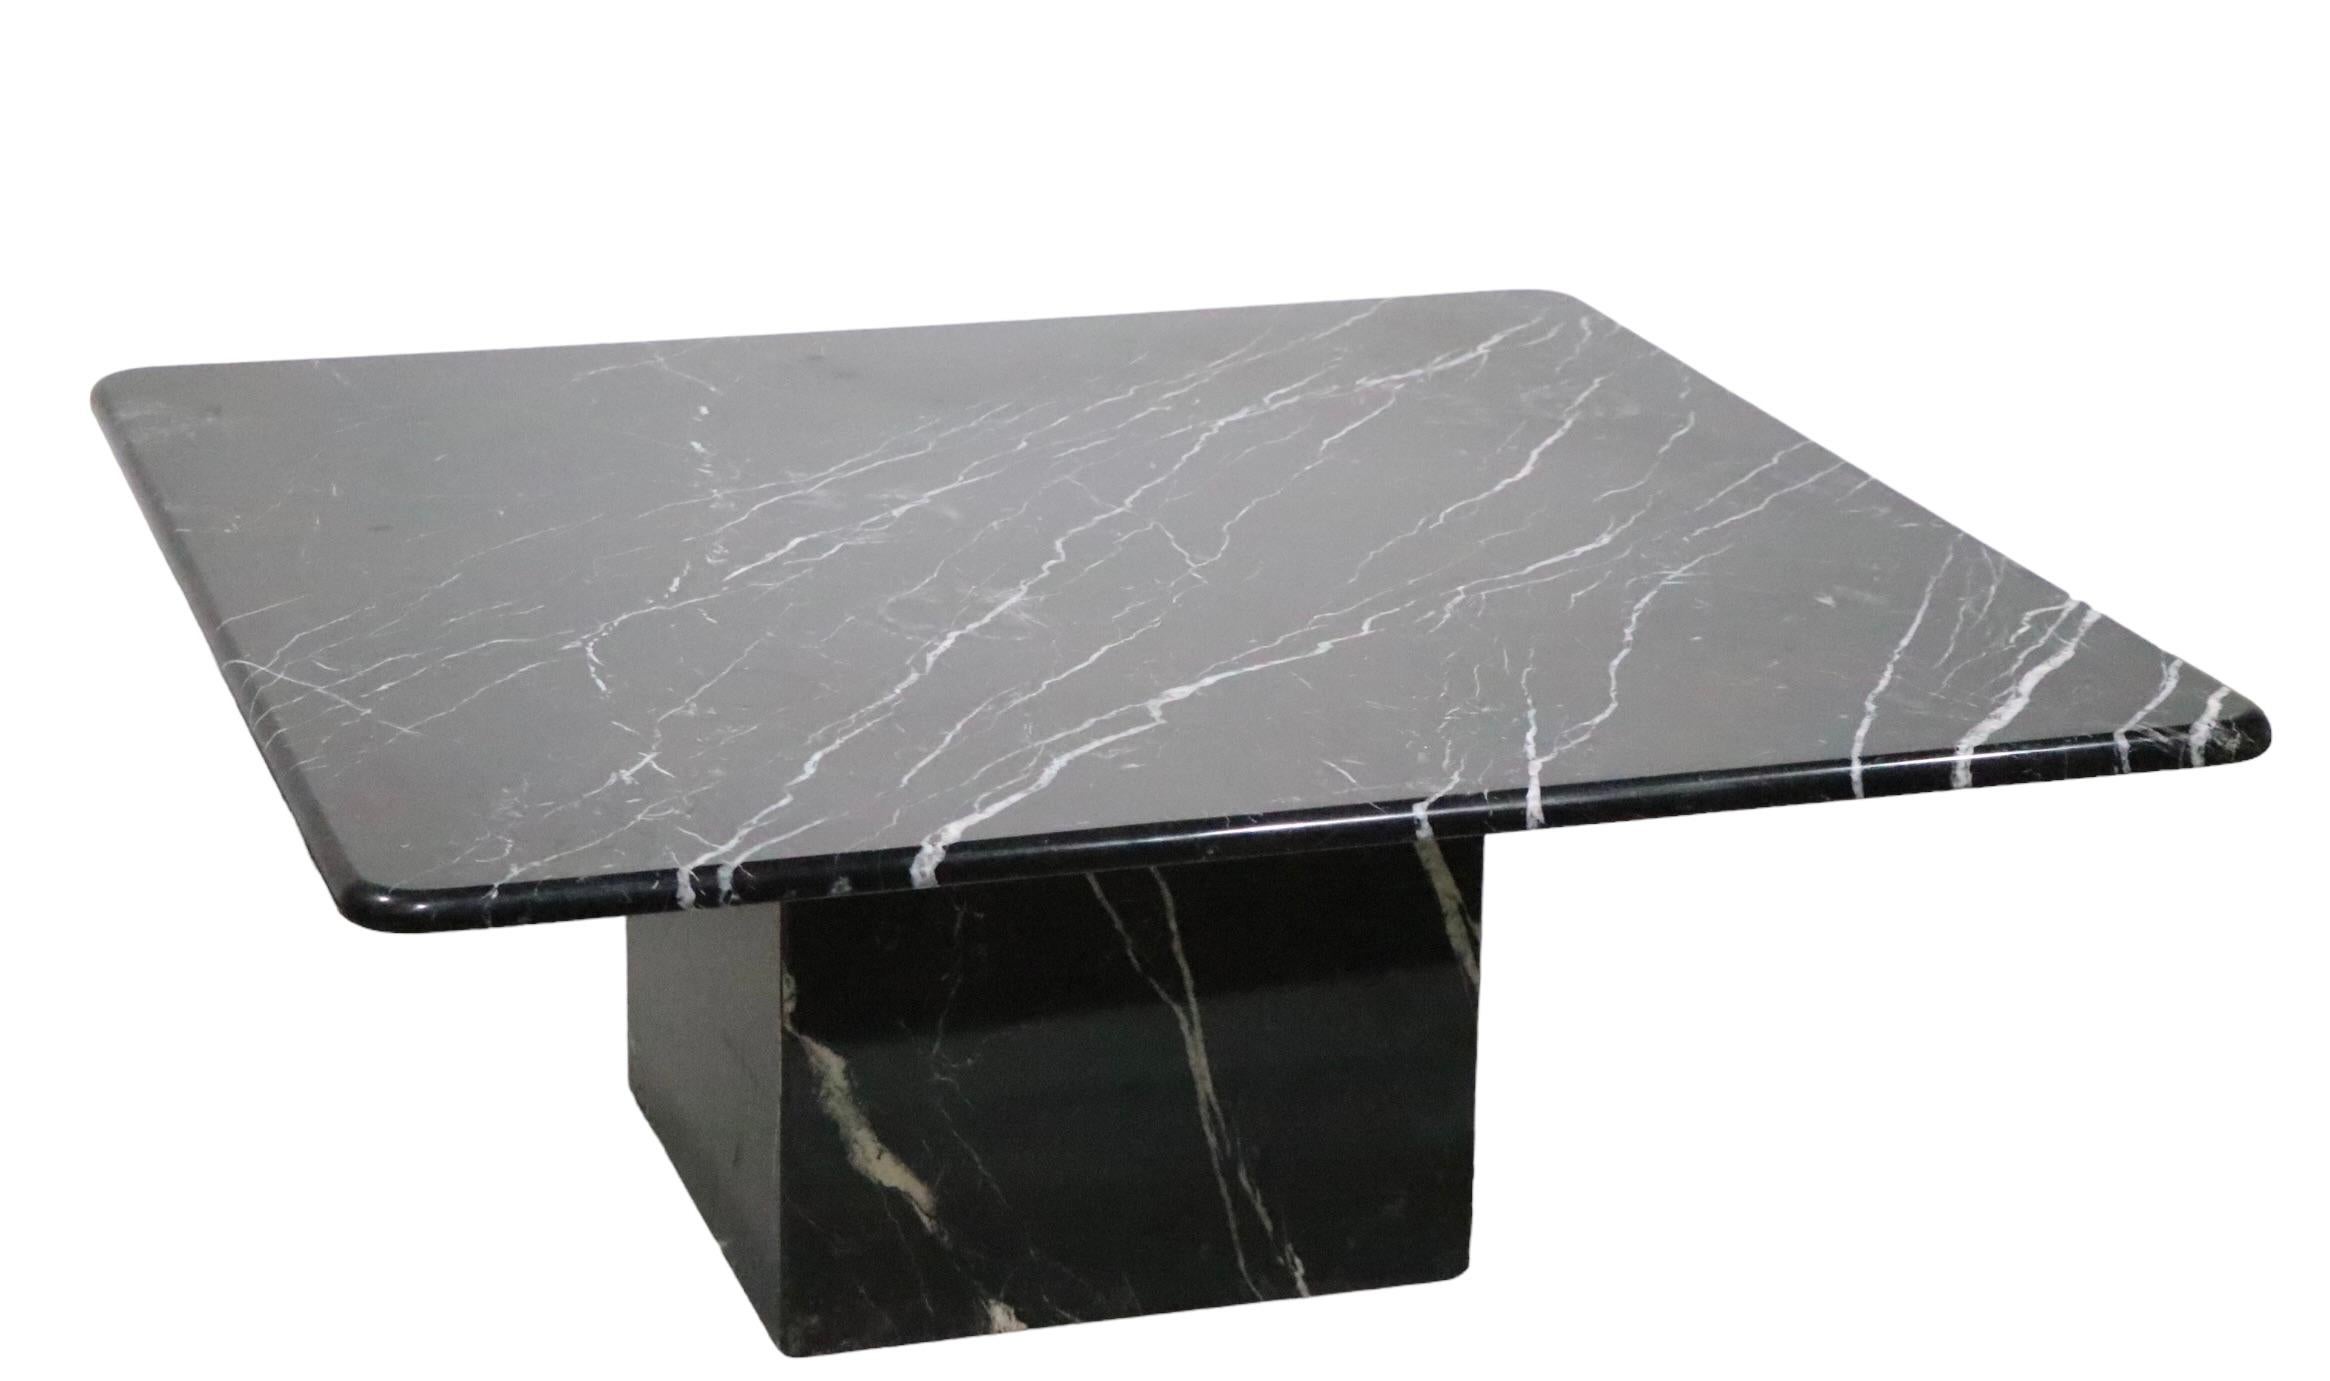 Post Modern Black Marble Pedestal Base Coffee Table Made in Italy c 1970’s In Good Condition For Sale In New York, NY